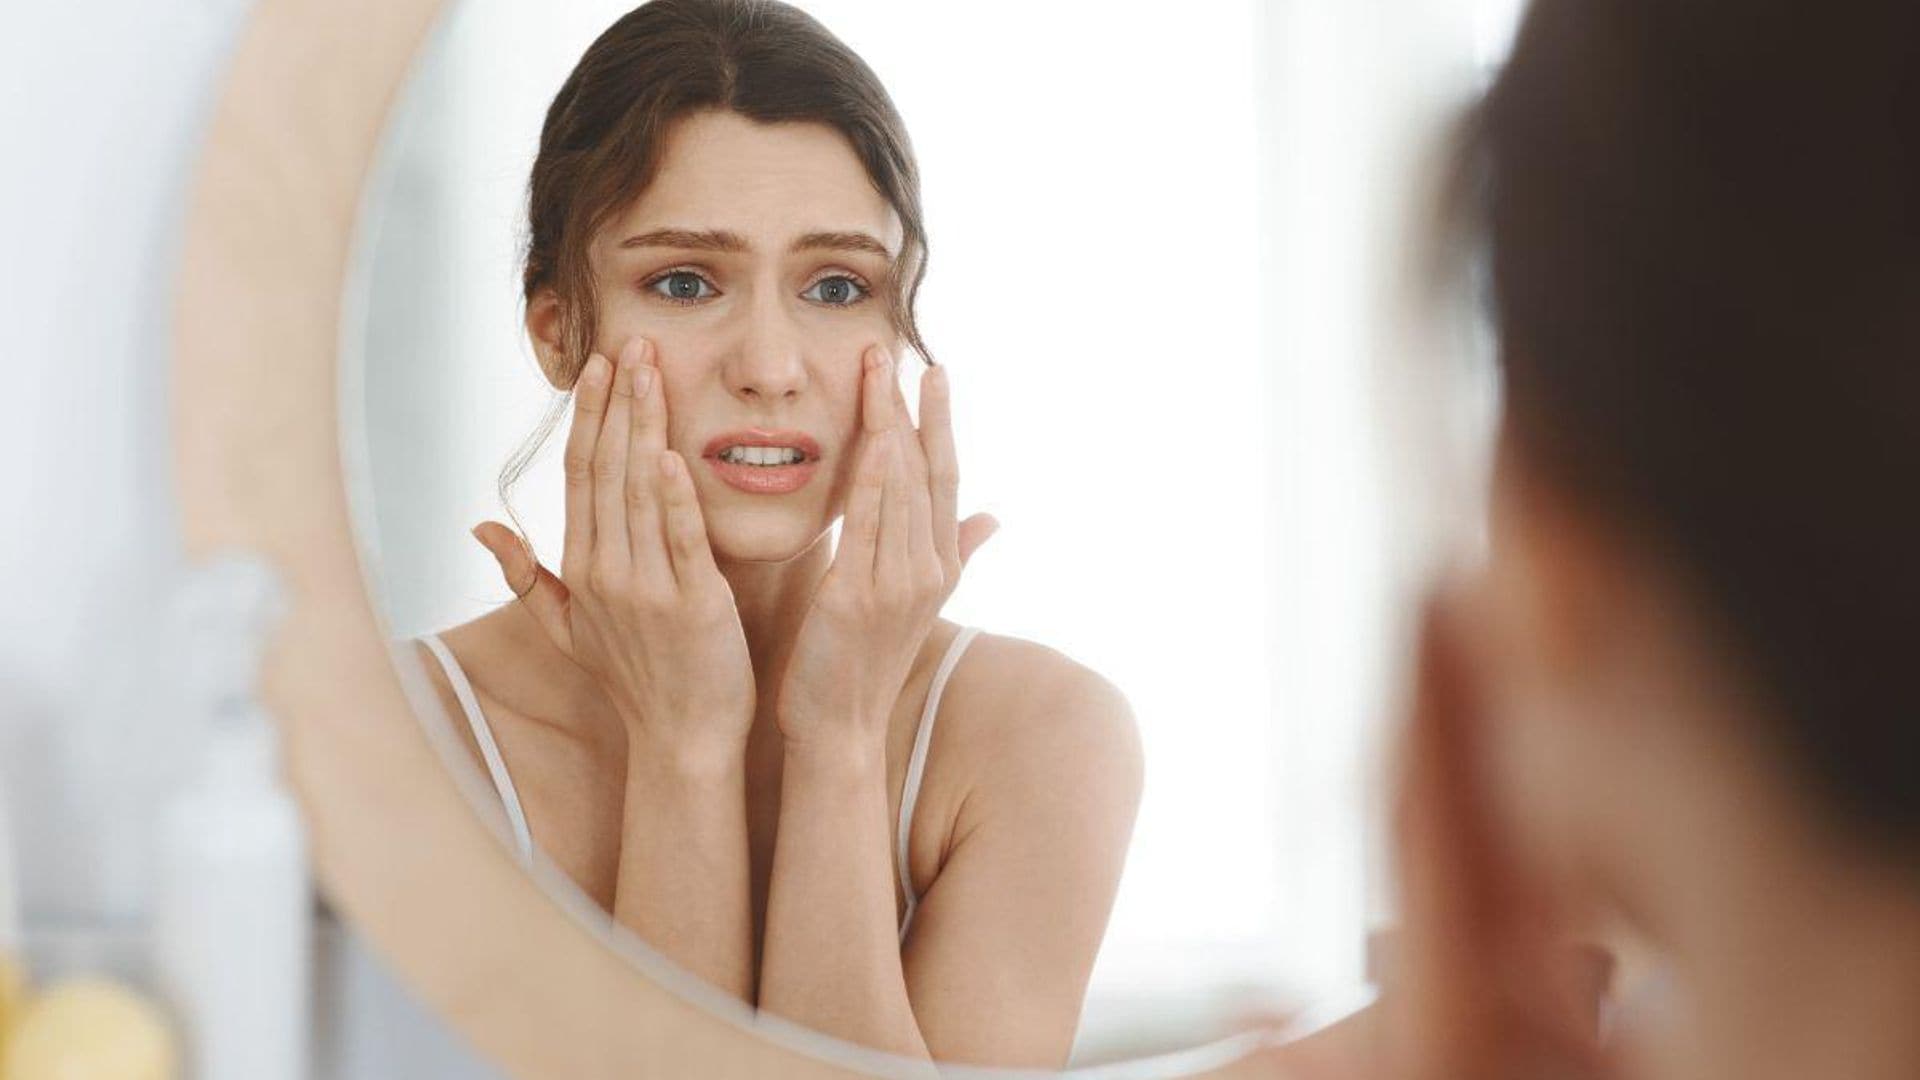 Do you know how stress affects your skin?